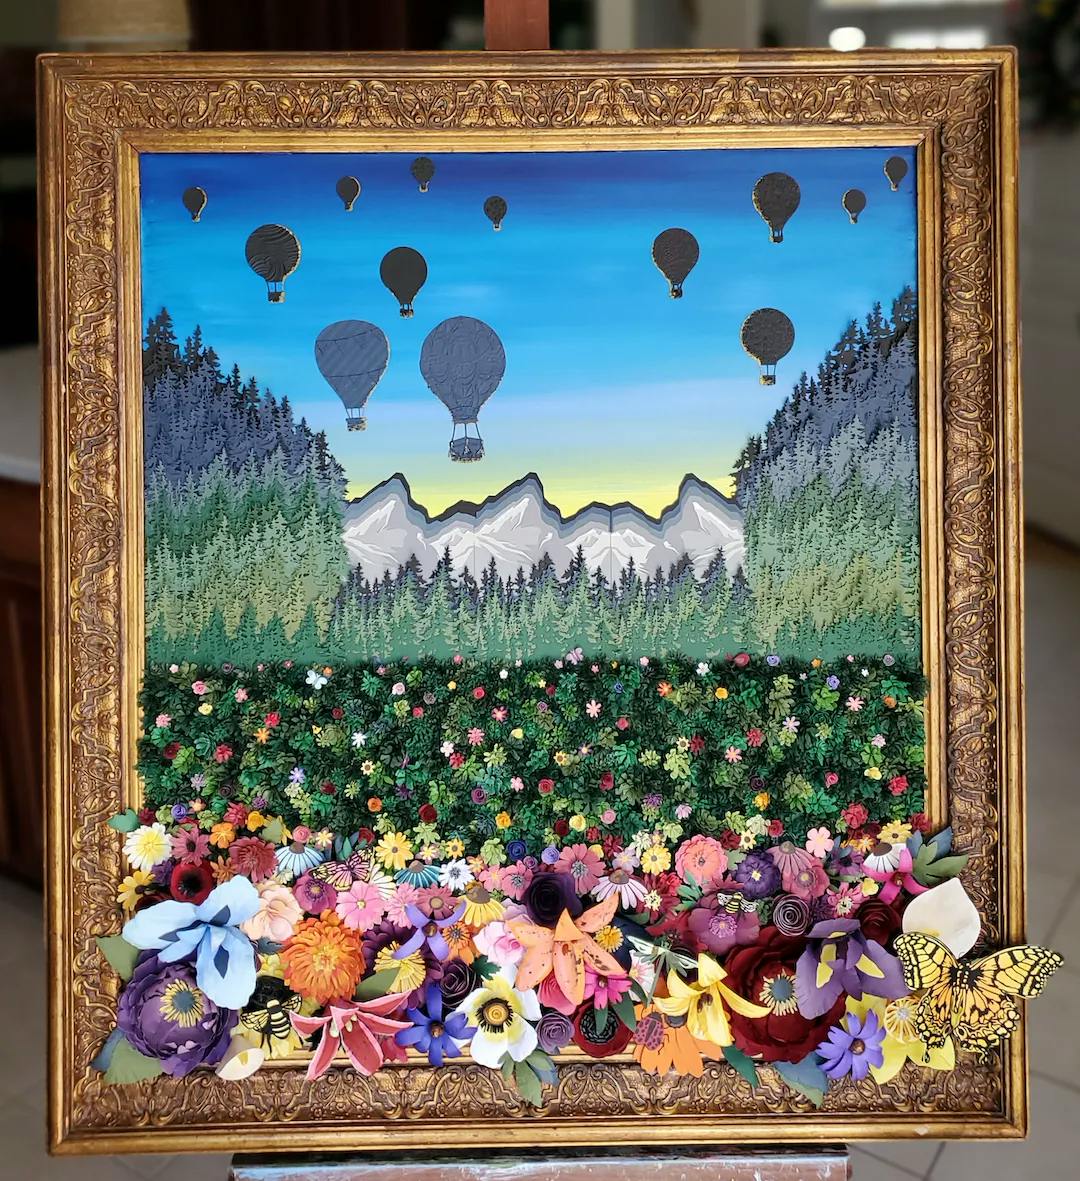 Michele Boudreaux - Elevated Serenity: A Paper Symphony of Blooms & Balloons